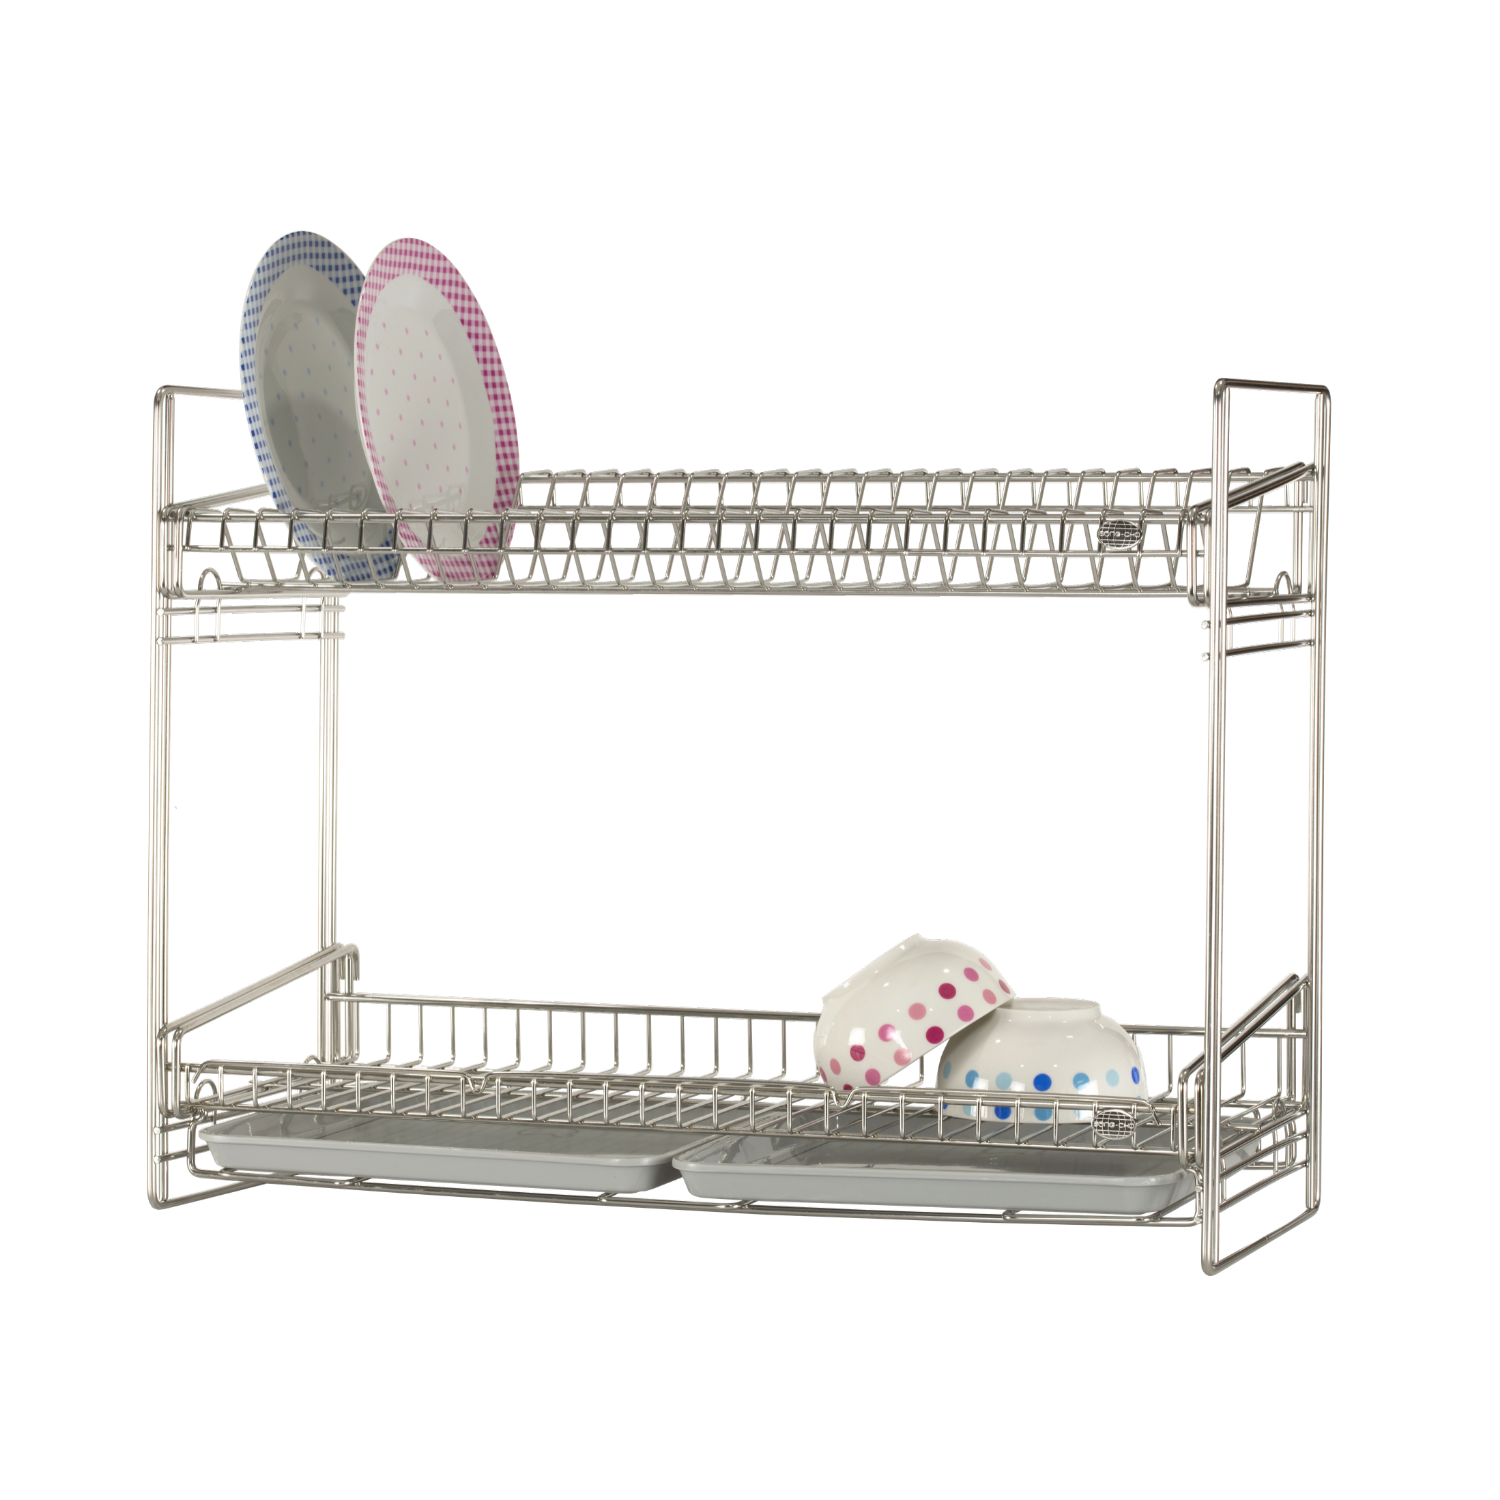 Song Cho 18.8 Stainless Steel 2-Tier Dish Rack, Table-Top (15331A1BS KD02MT)